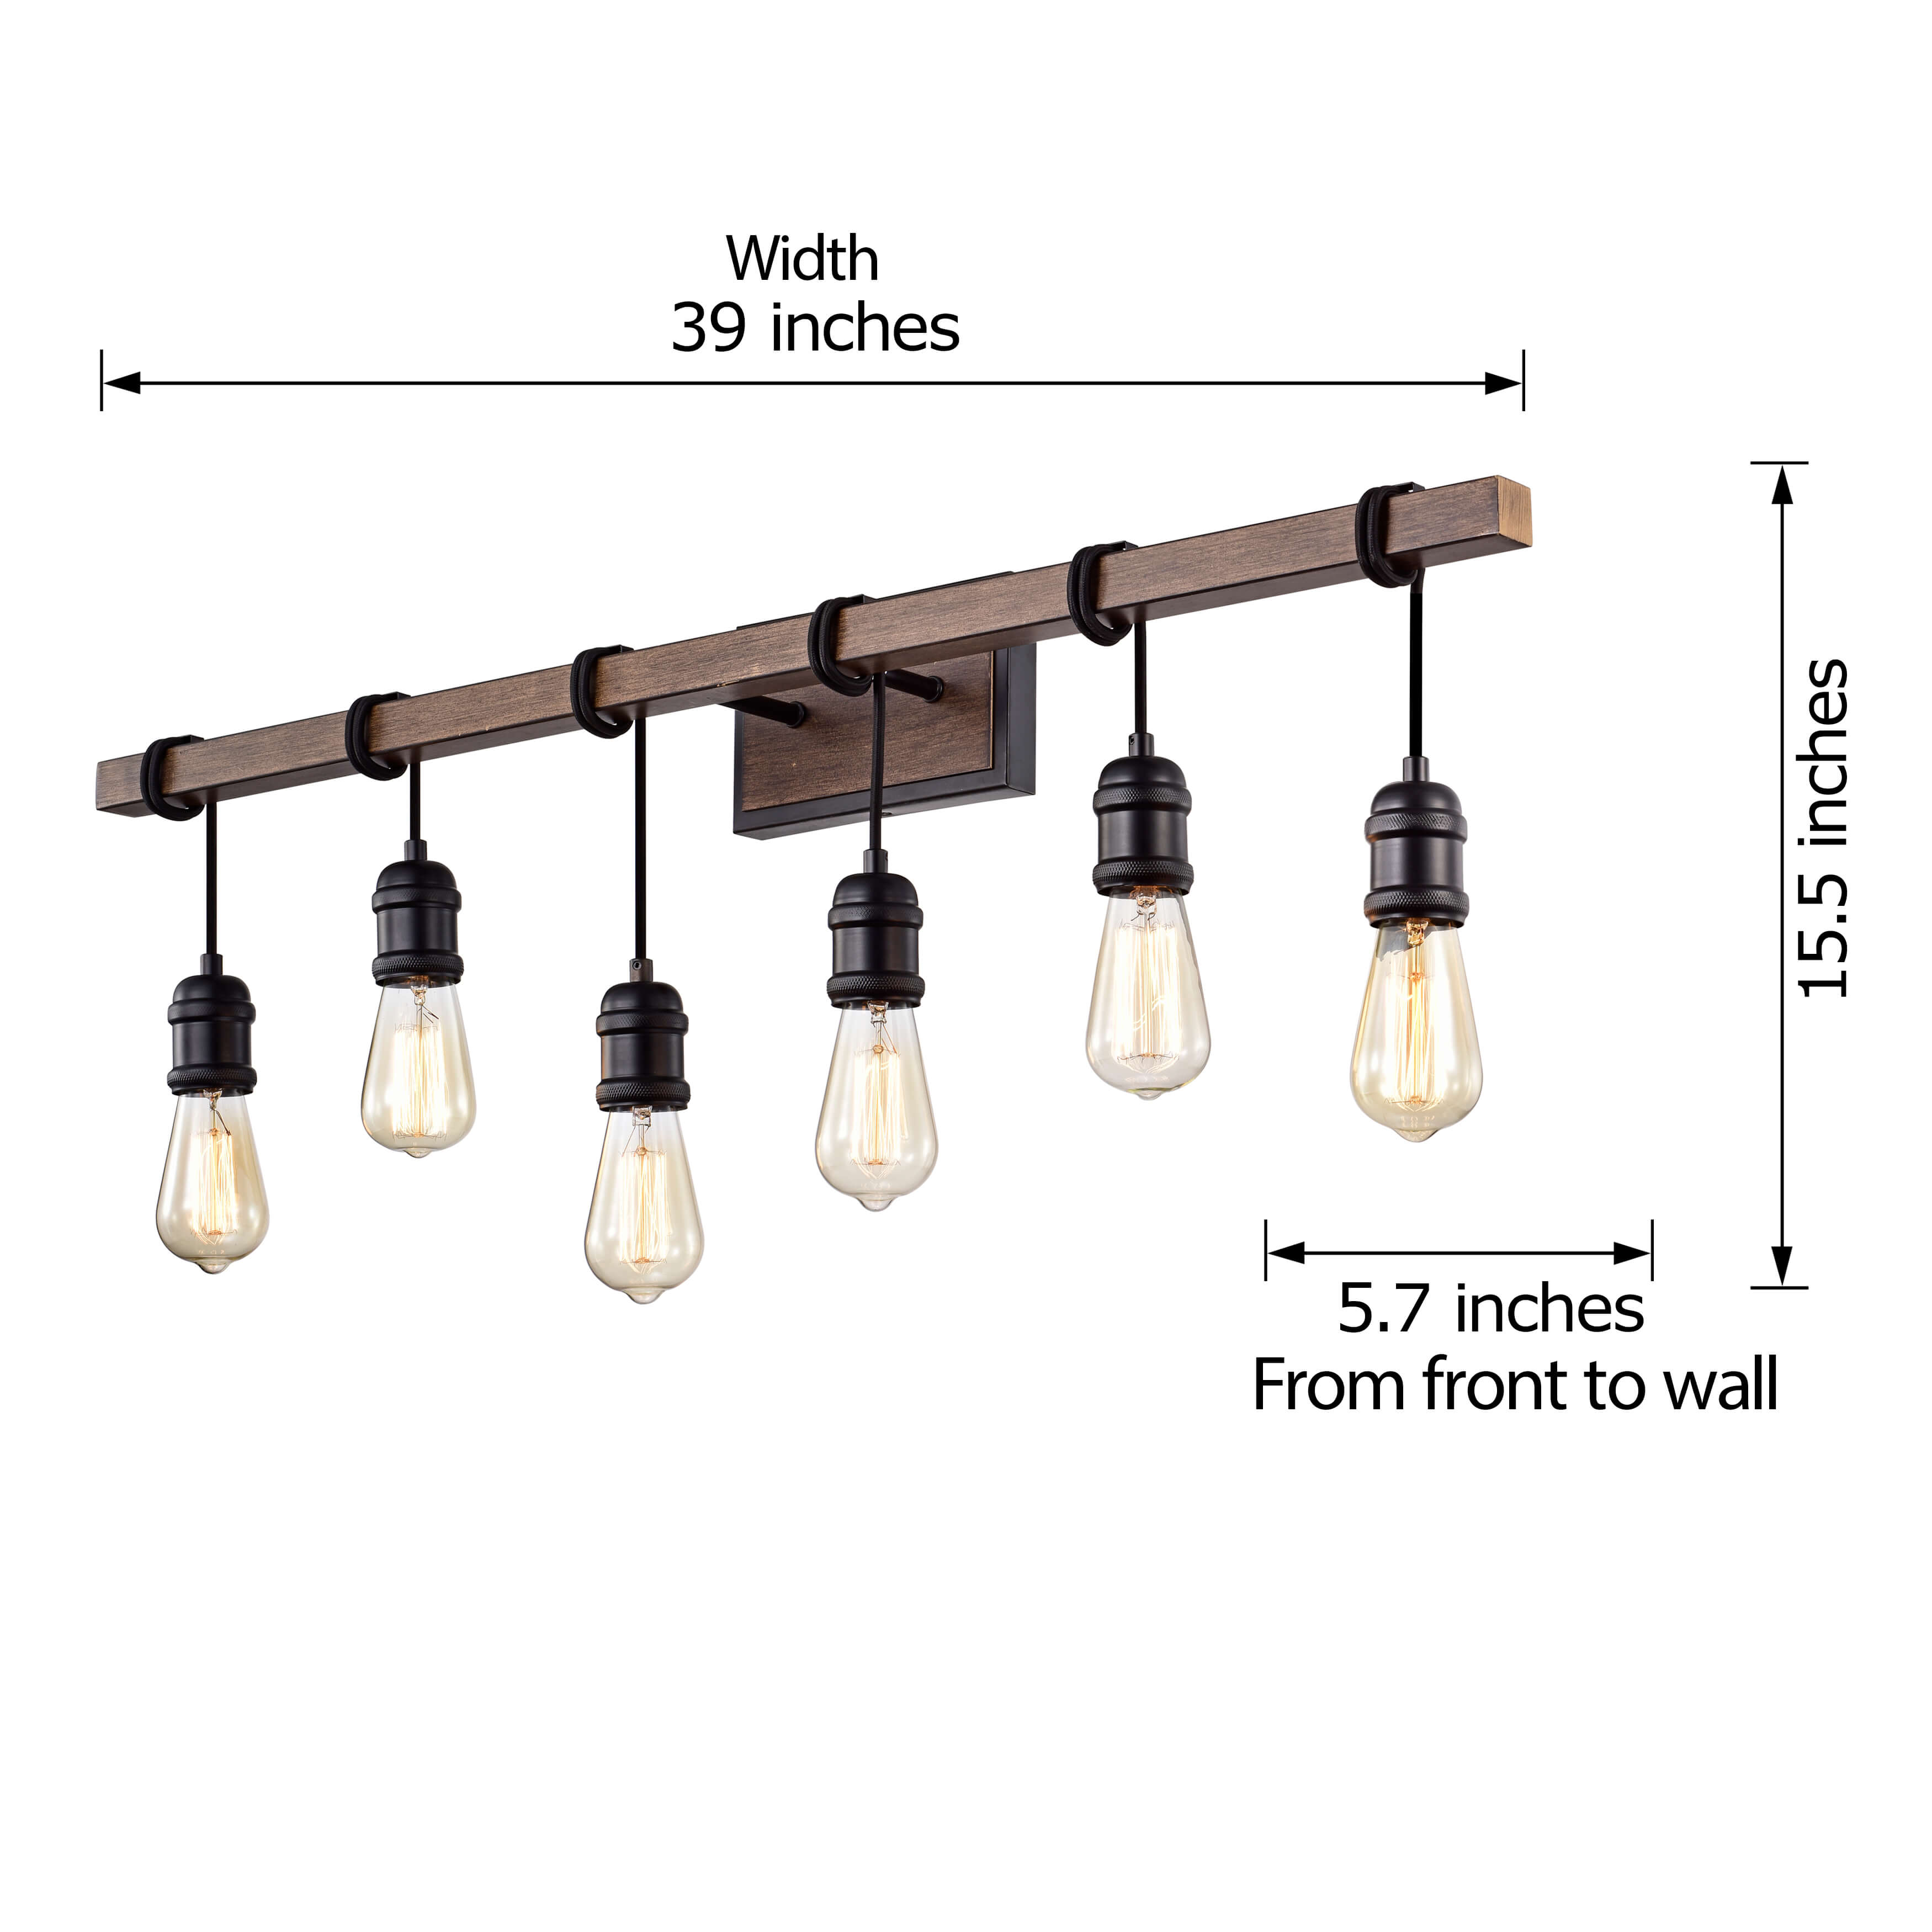 Betisa 6-light Antique Black and Faux Wood Grain Finish Wall Sconce LJ-3856-NXD